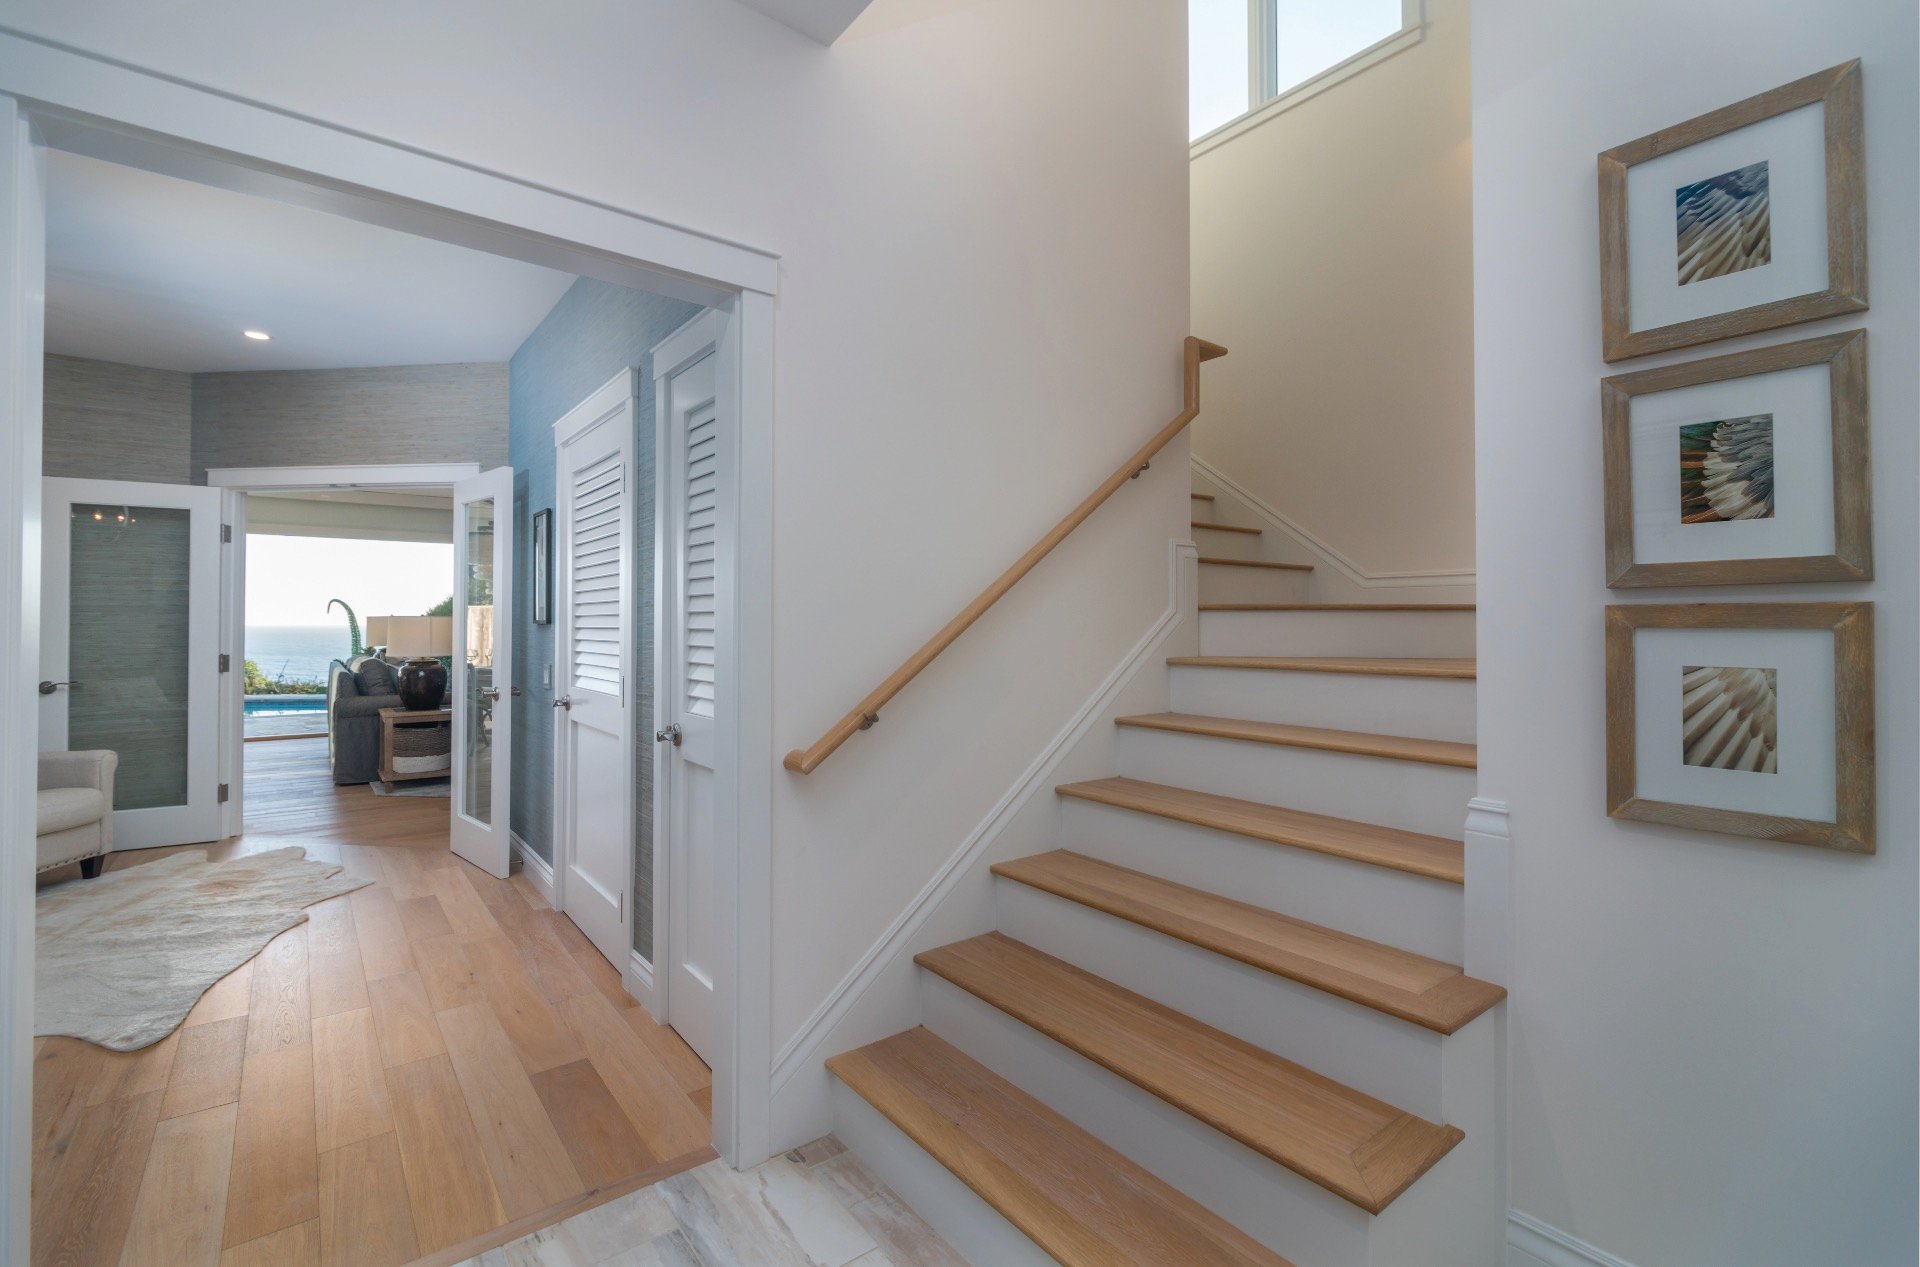 Stairway leading up to the master bedroom and one guest bedroom.